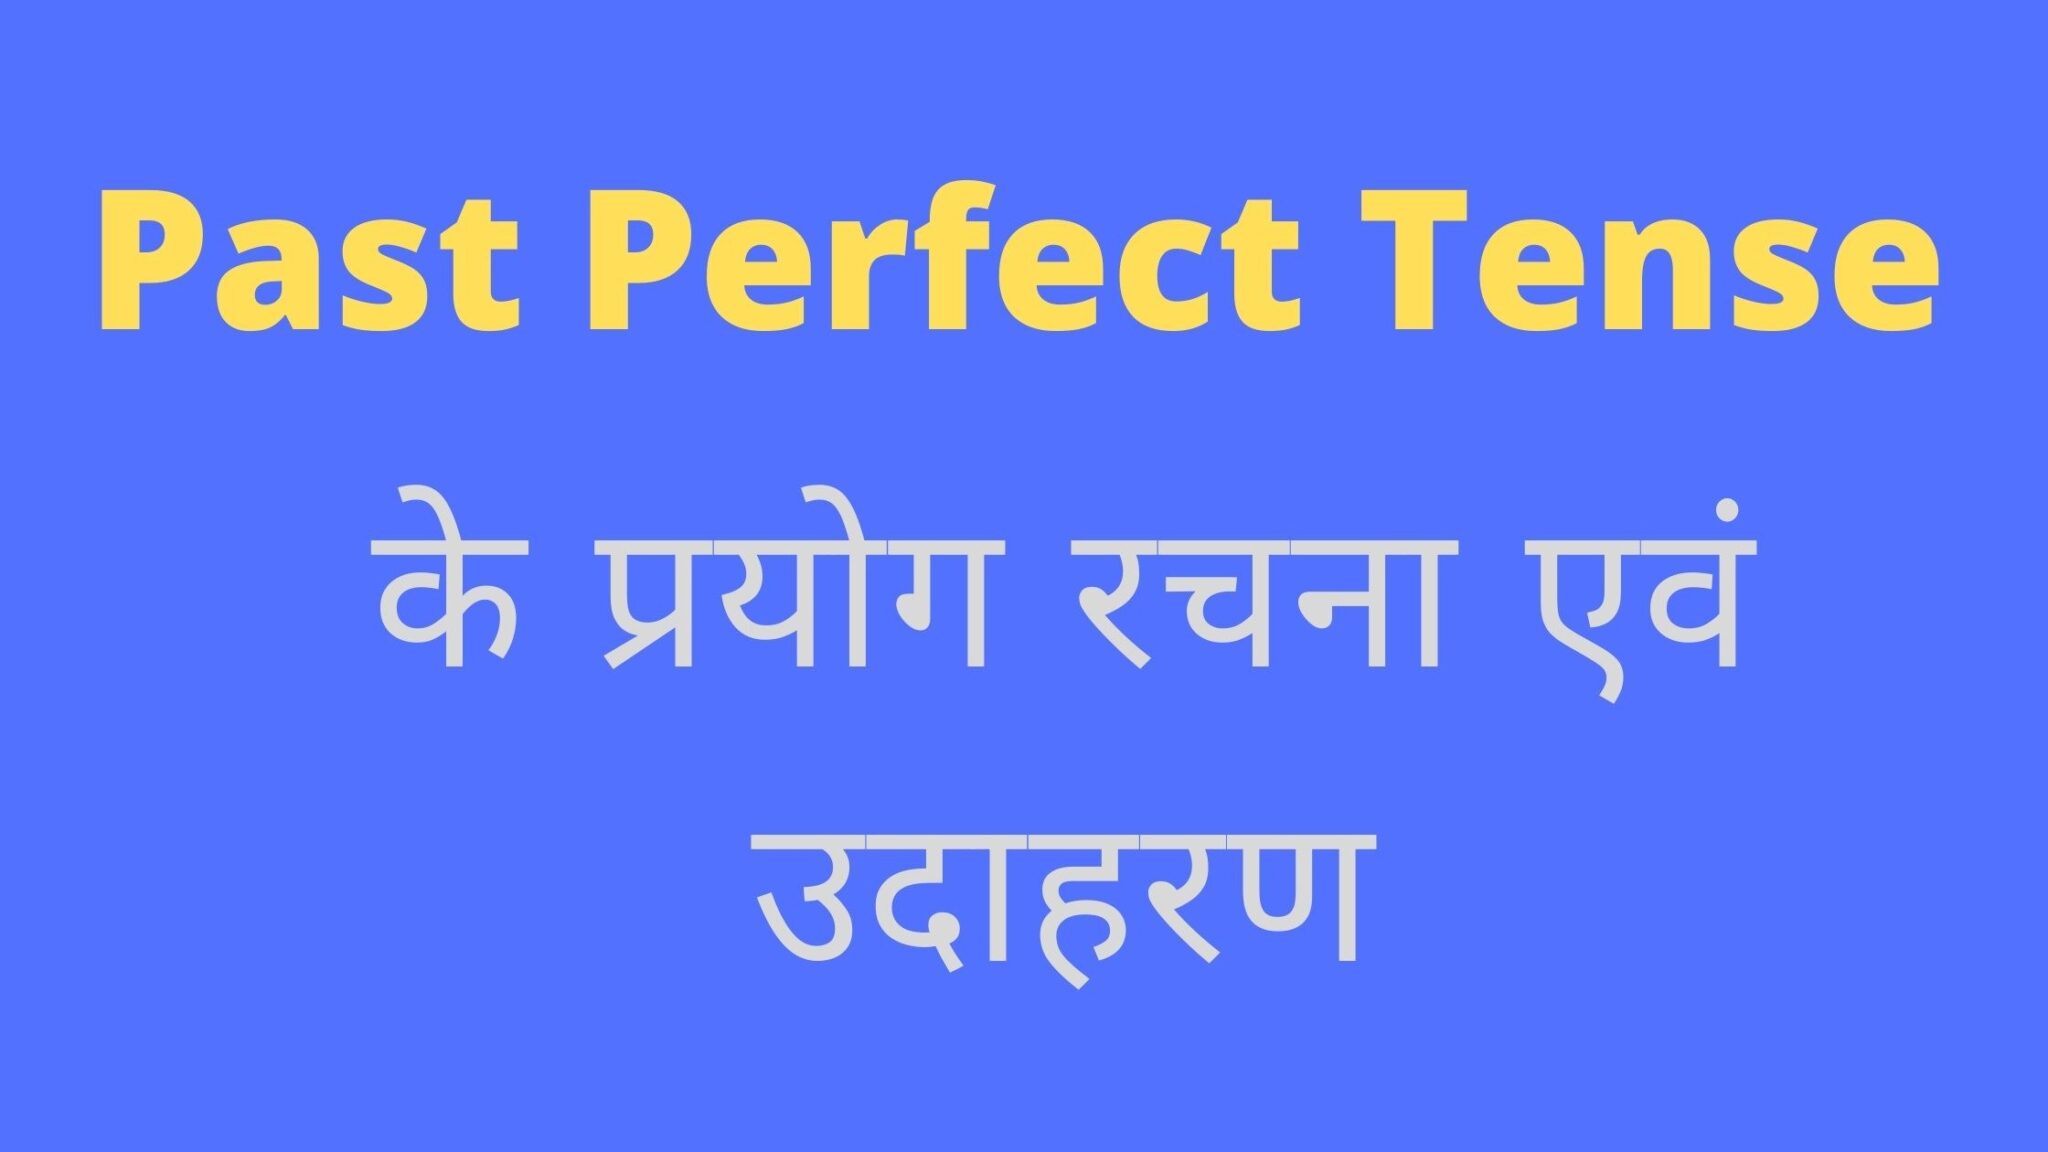 past-perfect-tense-help-guide-india